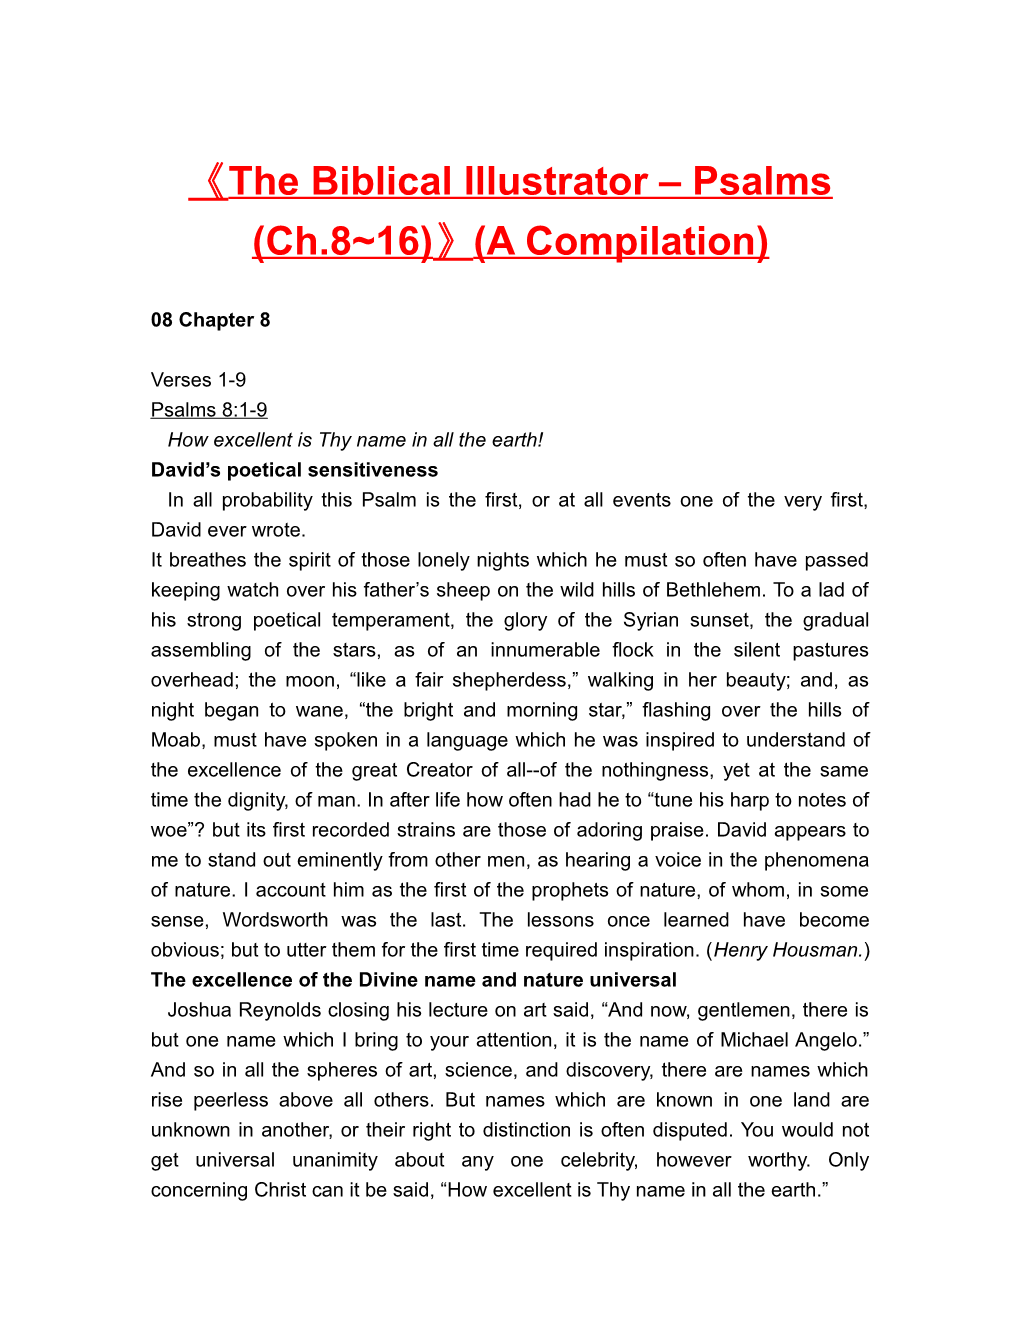 The Biblical Illustrator Psalms (Ch.8 16) (A Compilation)